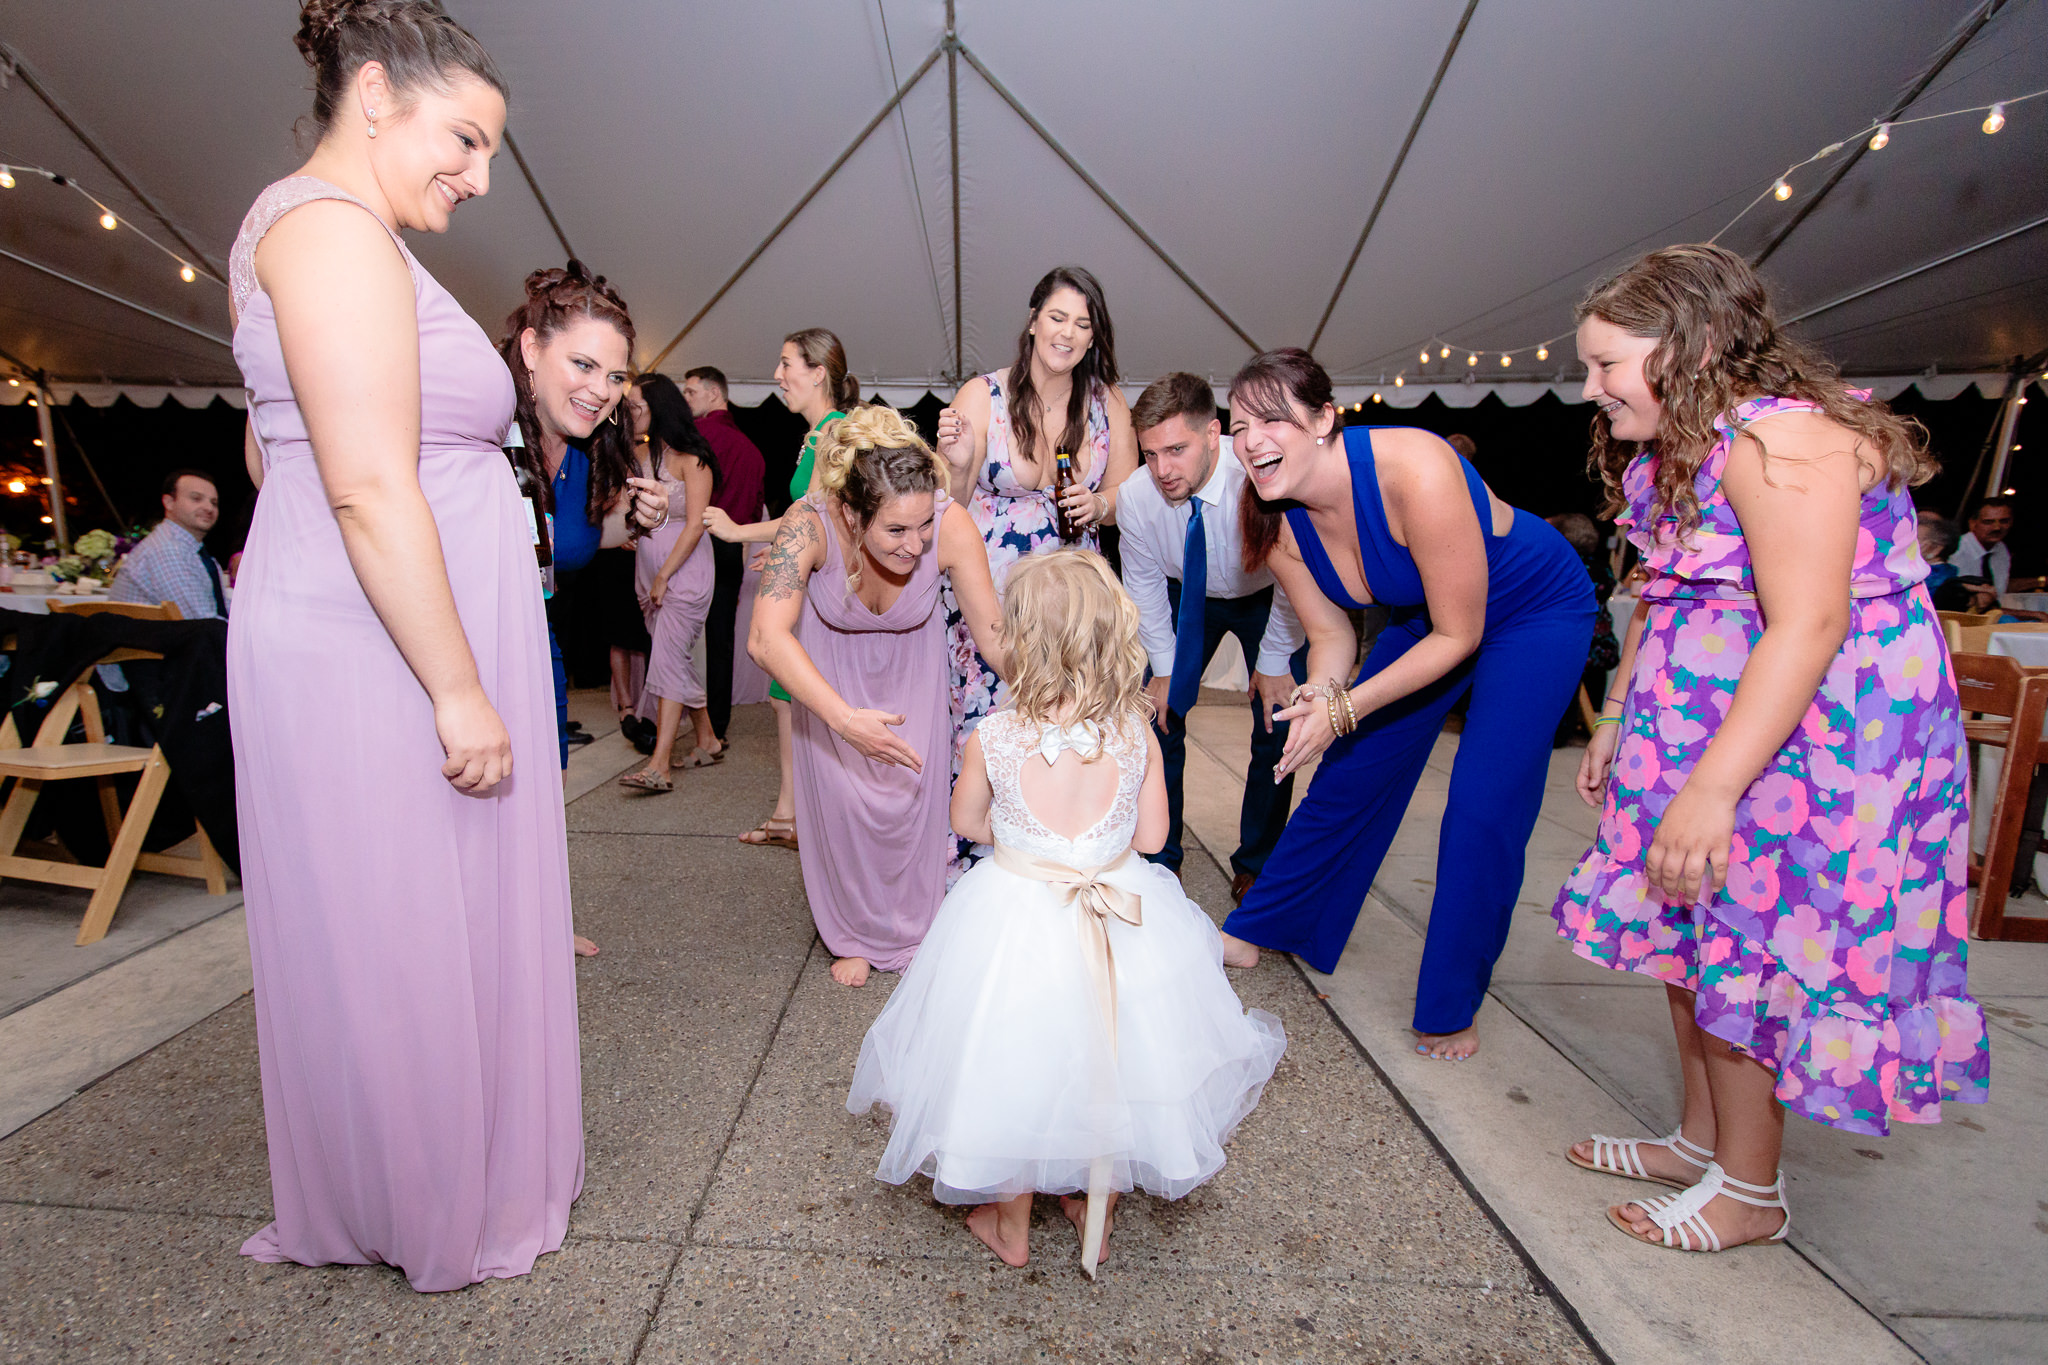 Guests dance with the flower girl at a National Aviary wedding